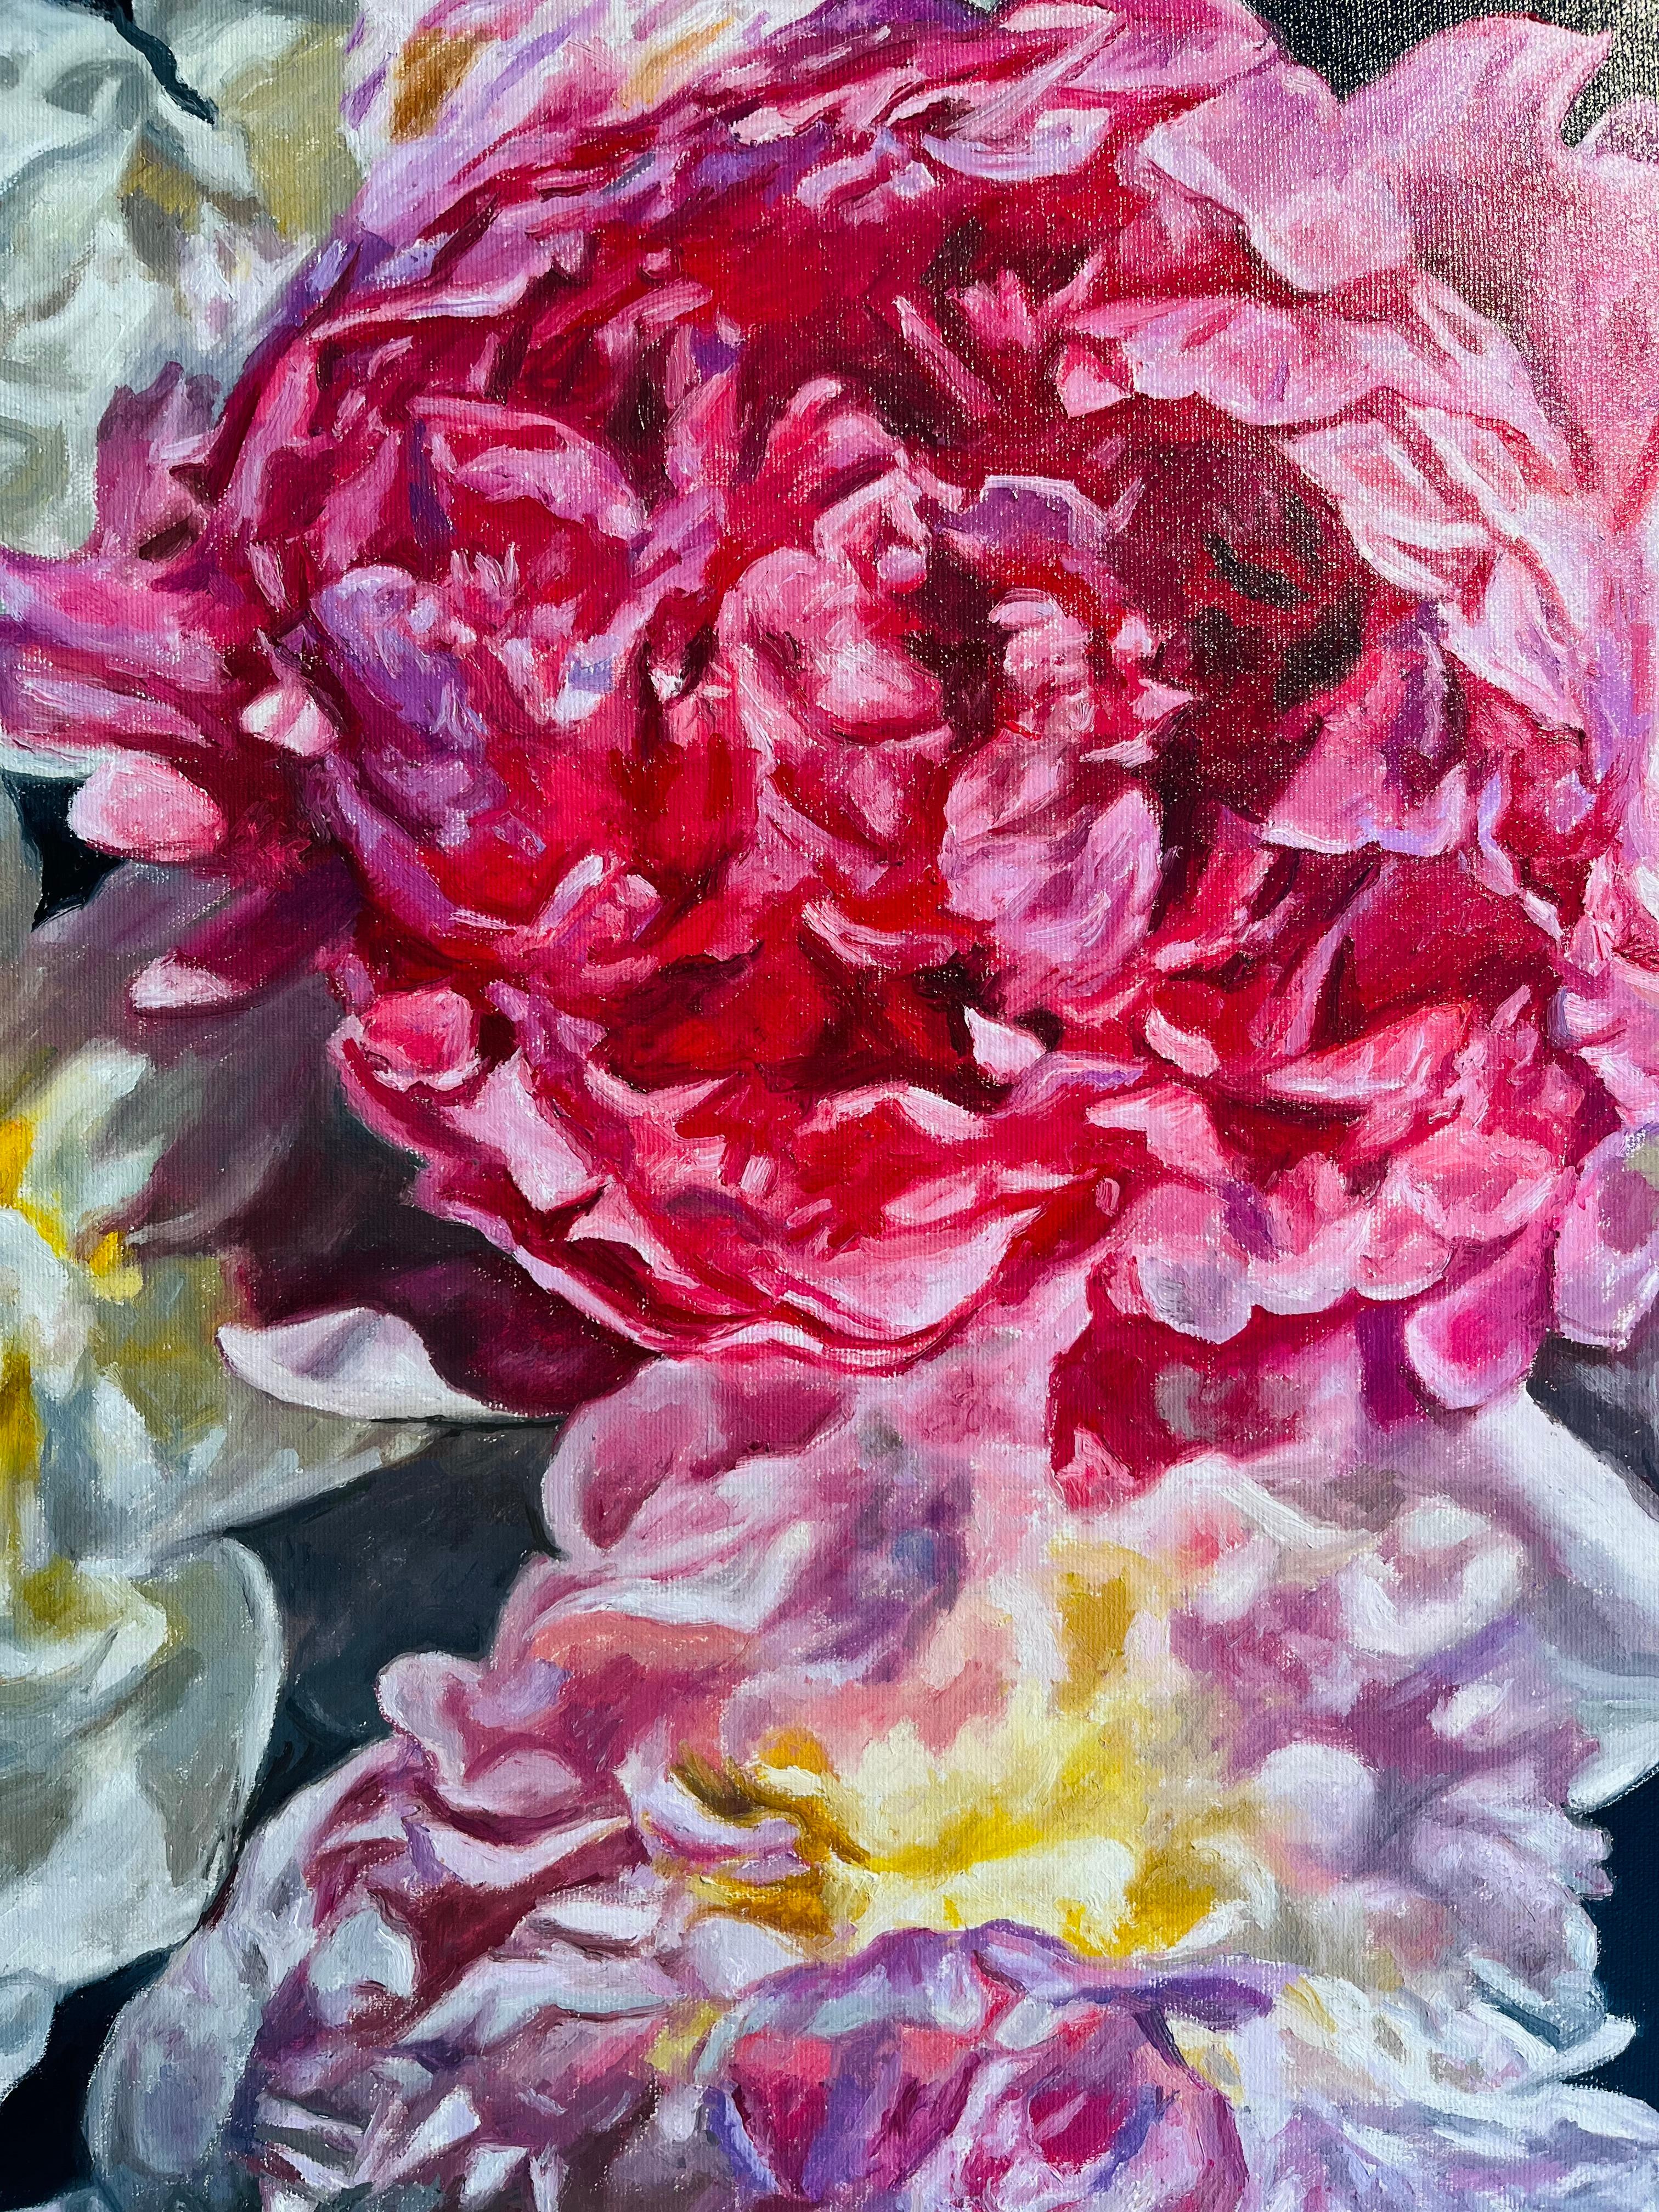 Contemporary realist painter Robert Lemay expressive a still life of flowers captured from an intimate perspective. This artwork demonstrates an attention to the delicate details of the subject matter, drawing attention to the natural beauty of the